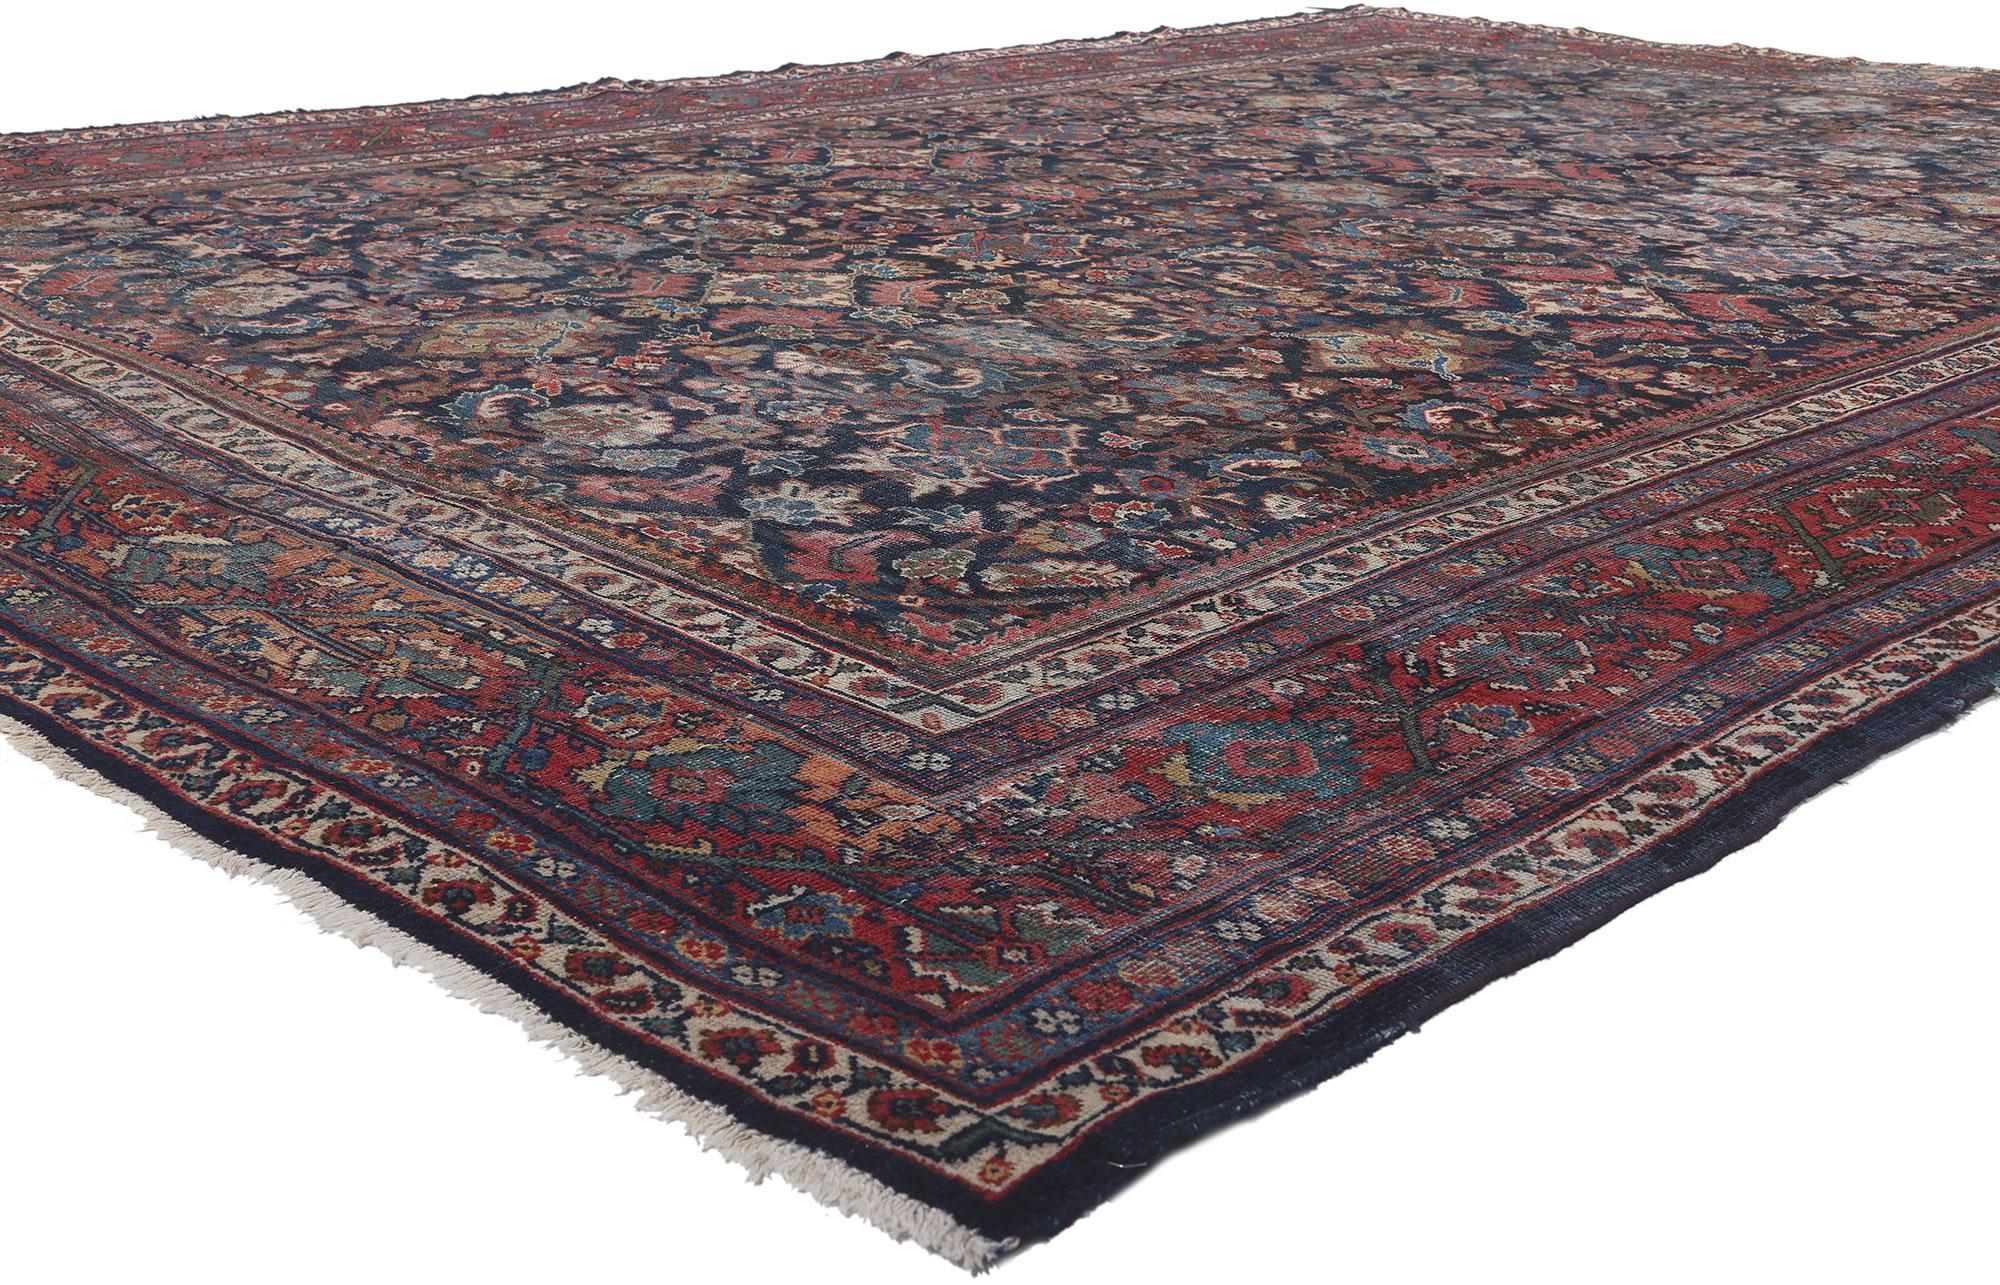 78529 Antique Persian Mahal Rug, 10'04 x 14'00. 
Emanating rustic sensibility and traditional style, this antique Persian Mahal rug is a captivating vision of woven beauty. The classic Herati design and refined color palette woven into this piece